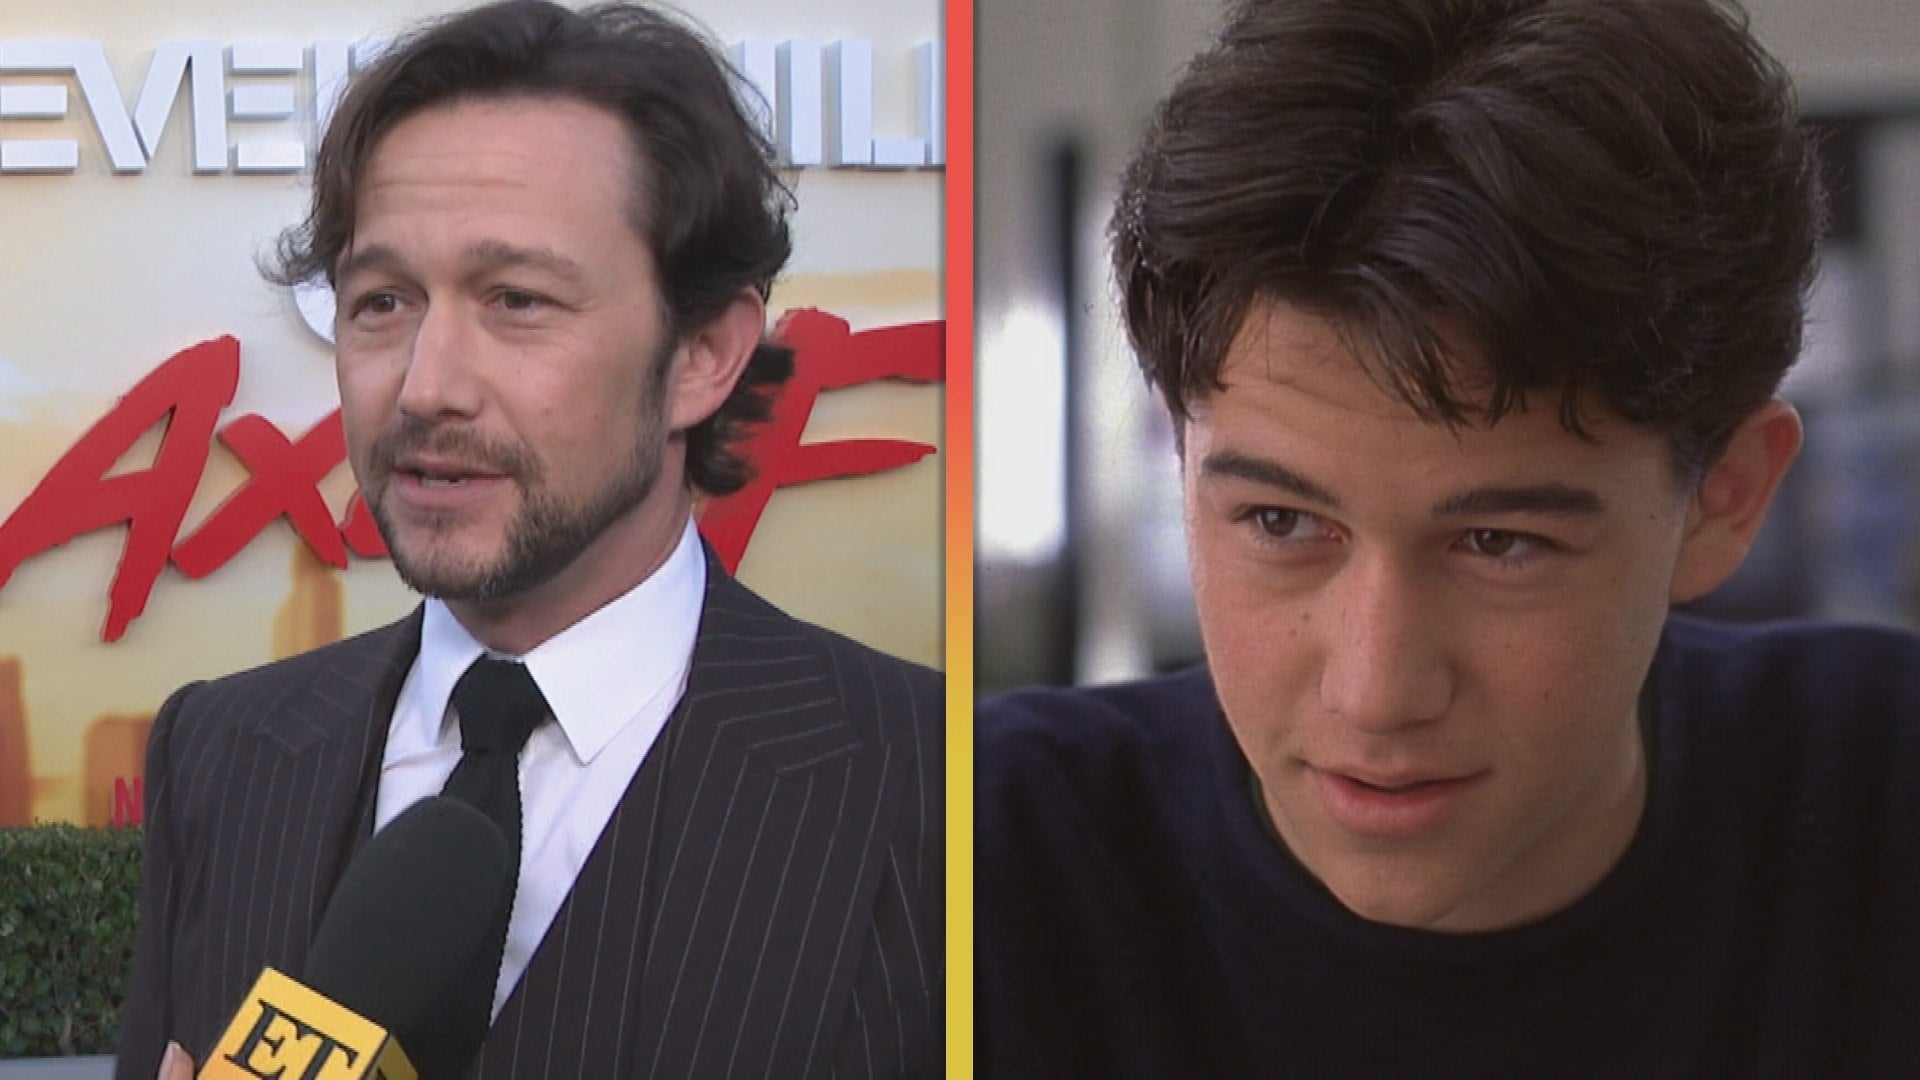 Joseph Gordon-Levitt Still Shocked by ‘10 Things I Hate About You’ Fan Reaction 25 Years Later 